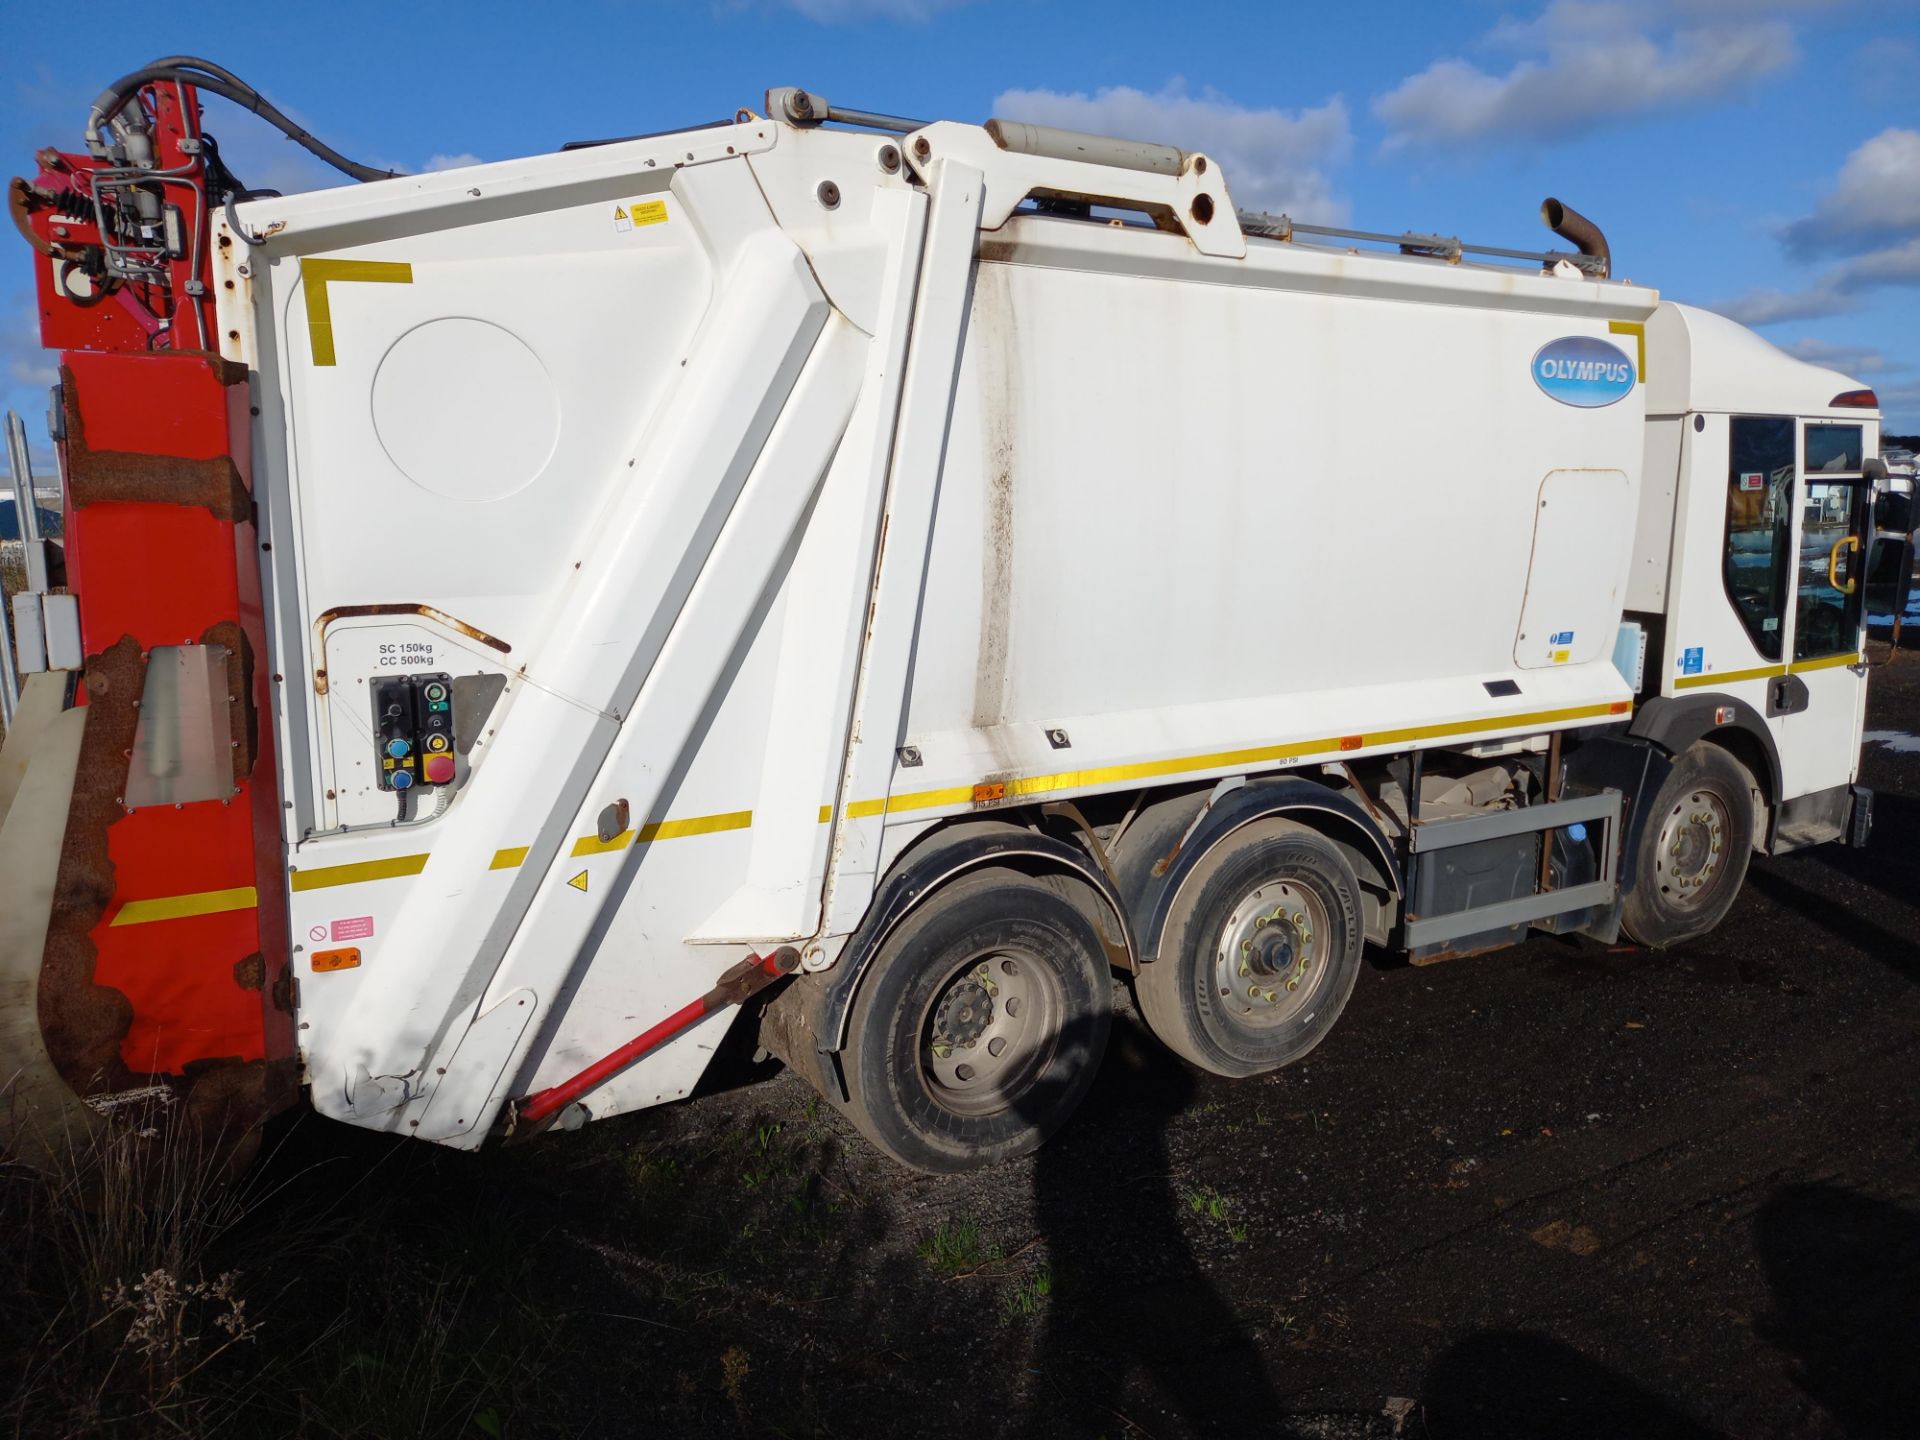 2015 Dennis Elite 6 Refuse Collection Vehicle - Image 2 of 13